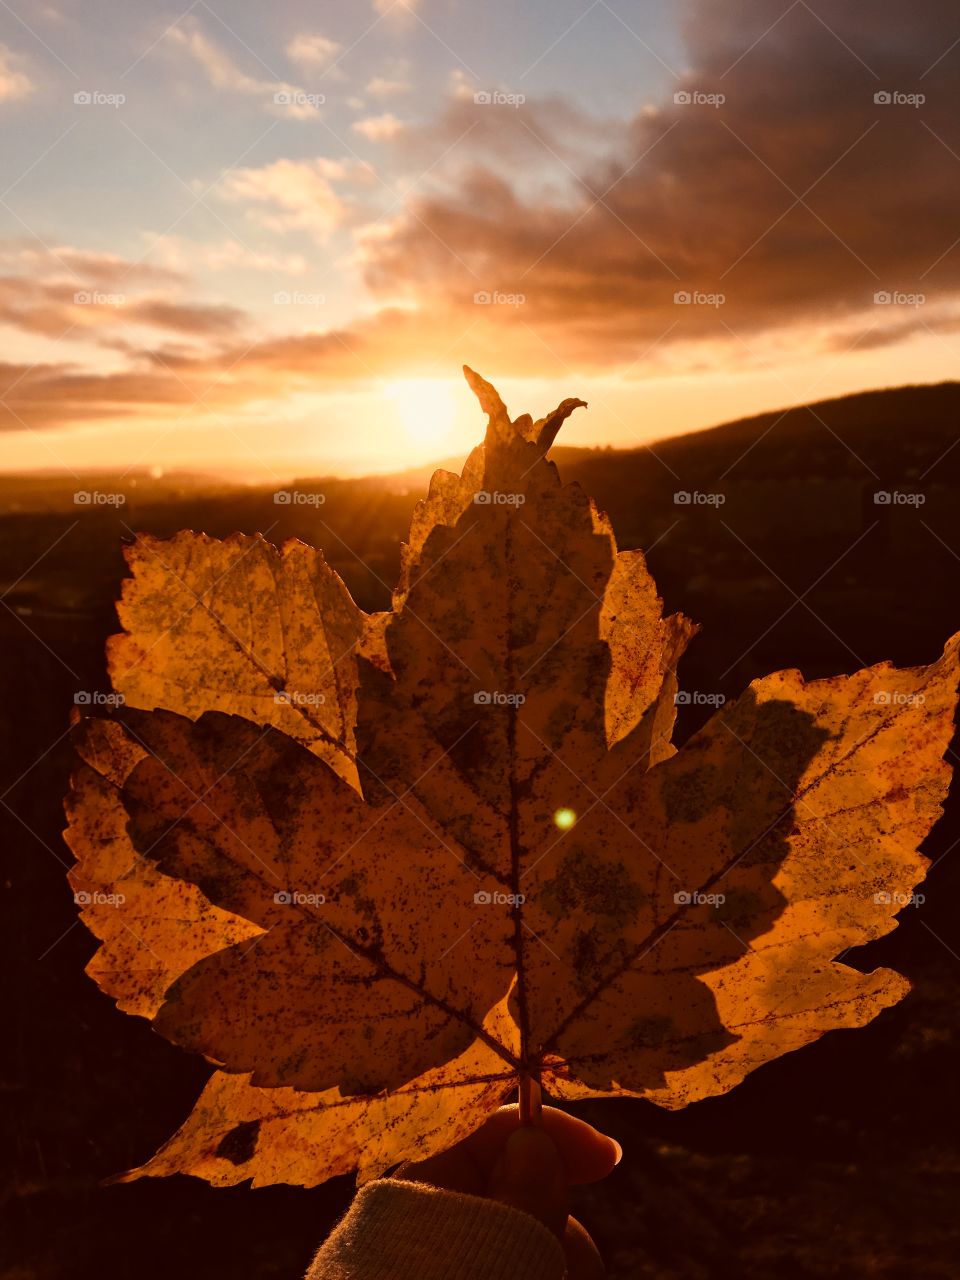 Sunset and maple leaf